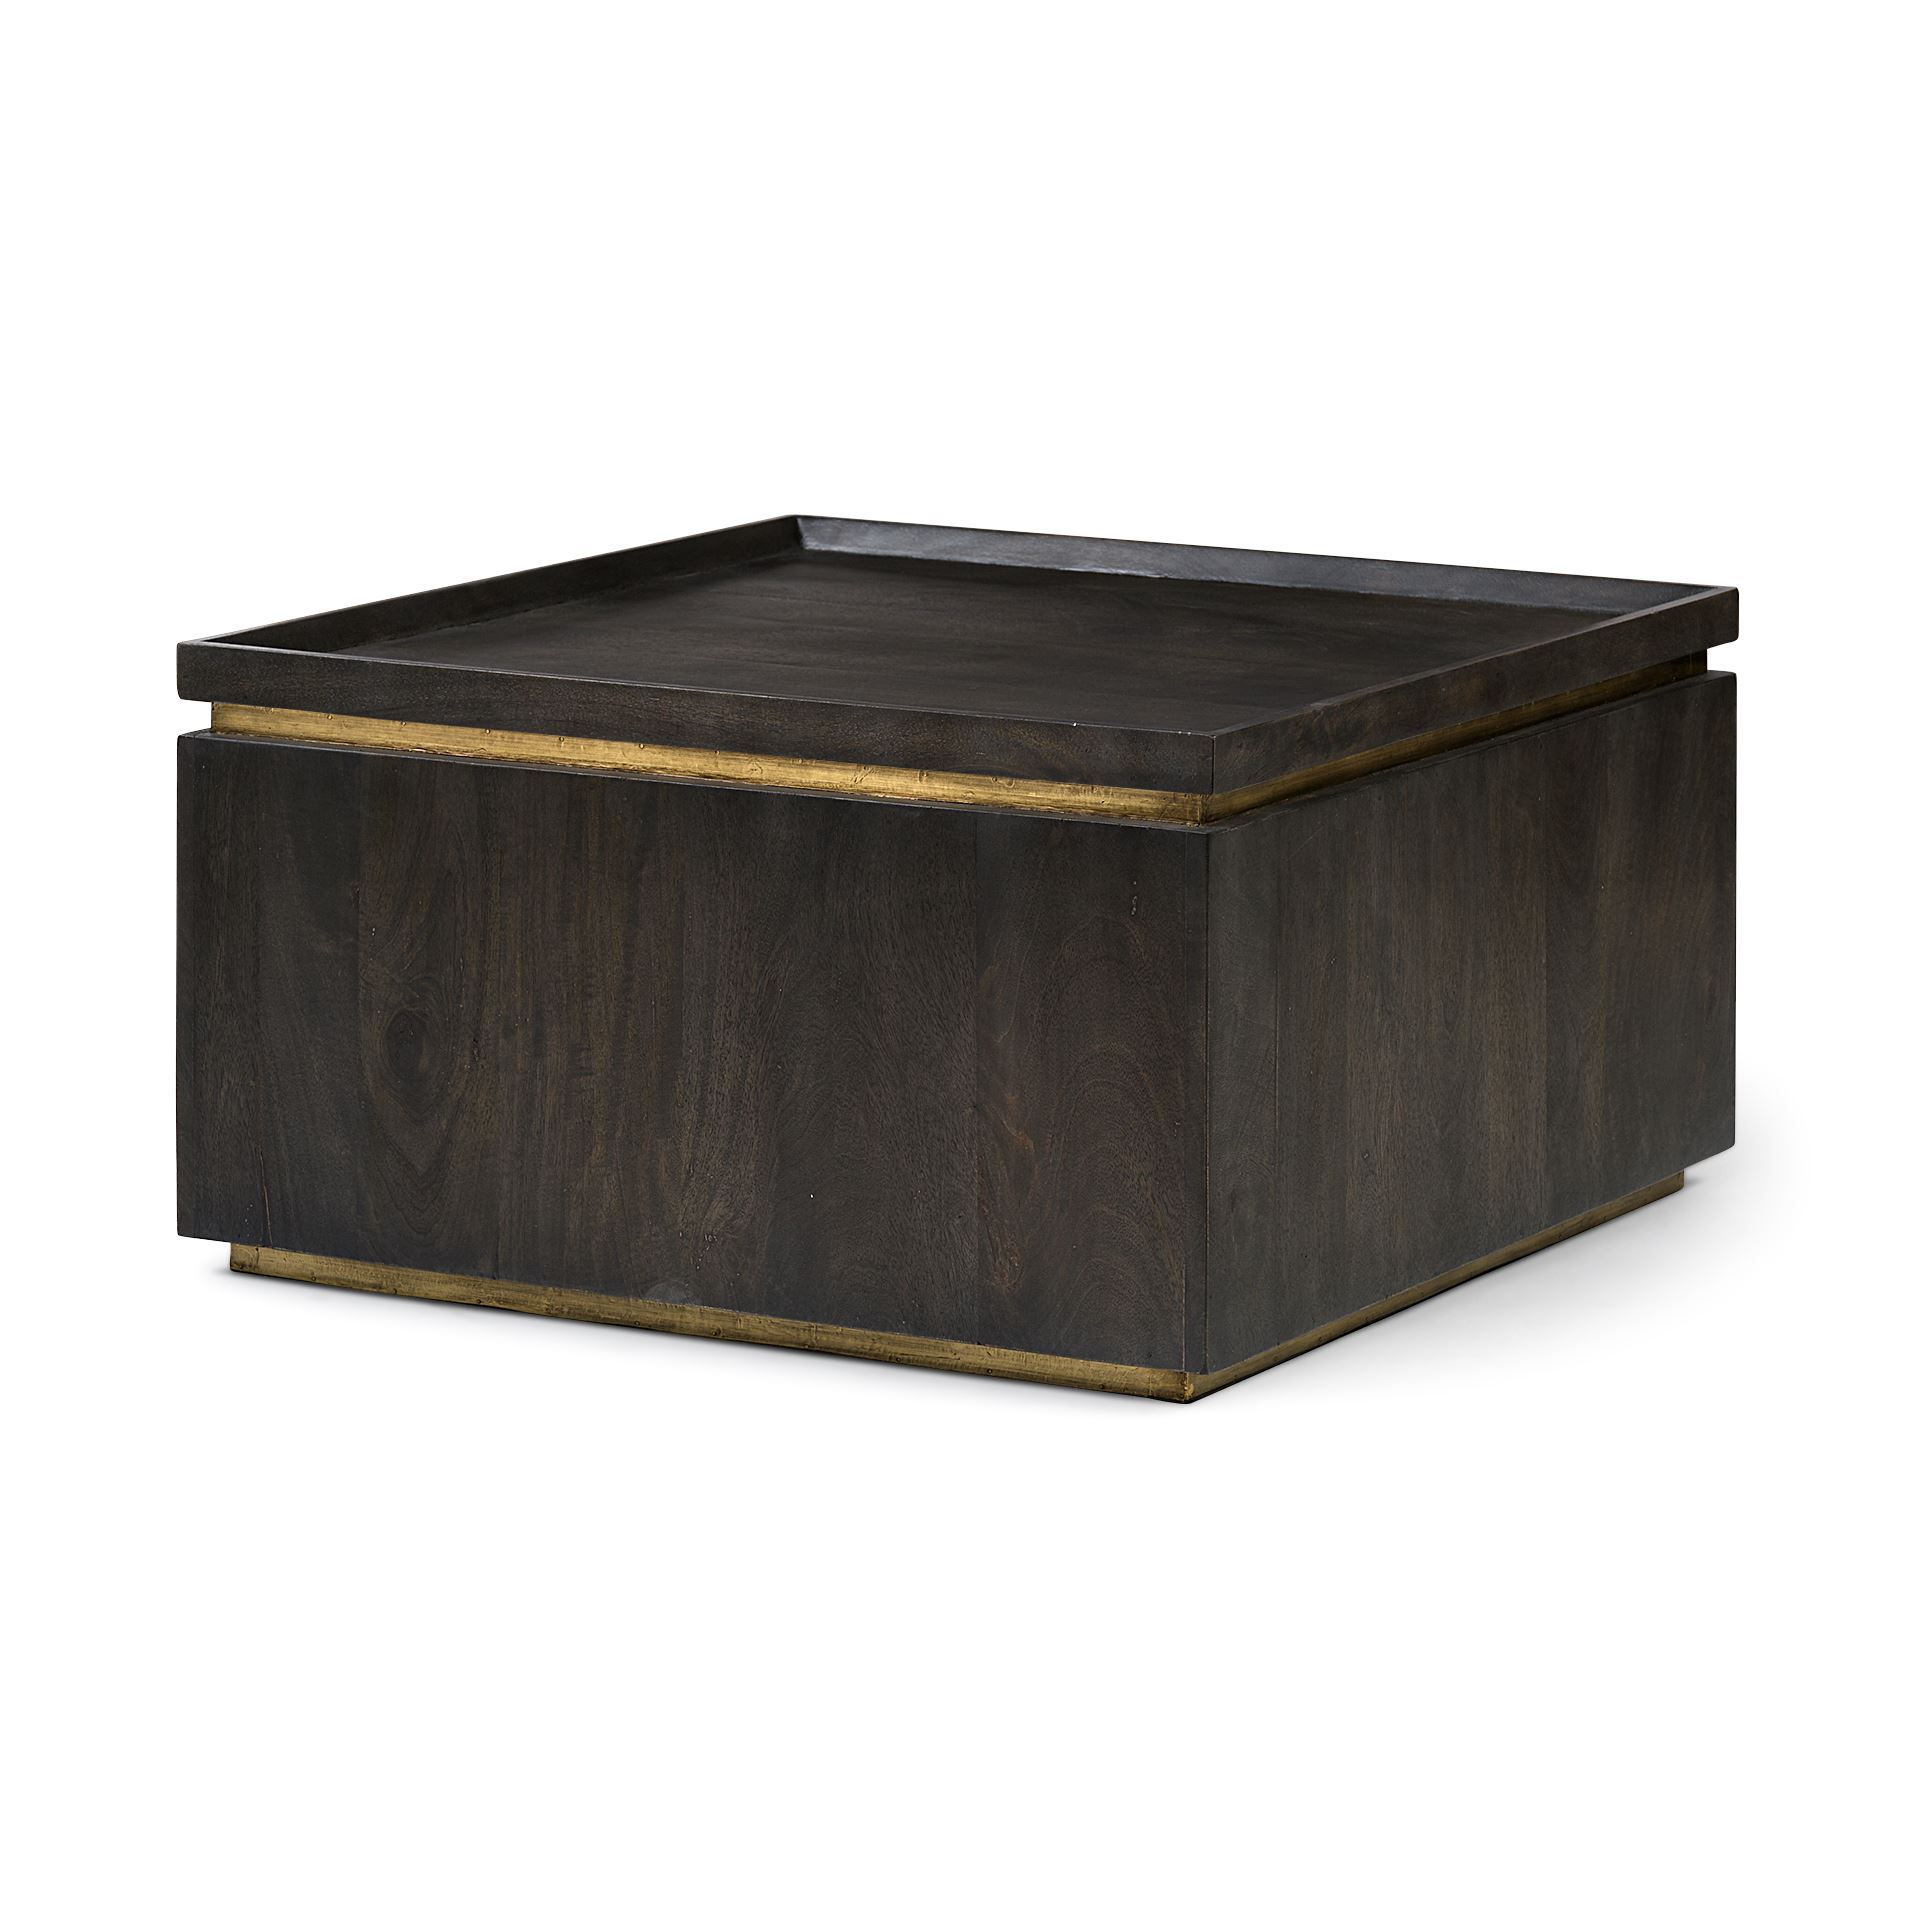 Square Brown Hinged Top Coffee Table w/ Hidden Storage